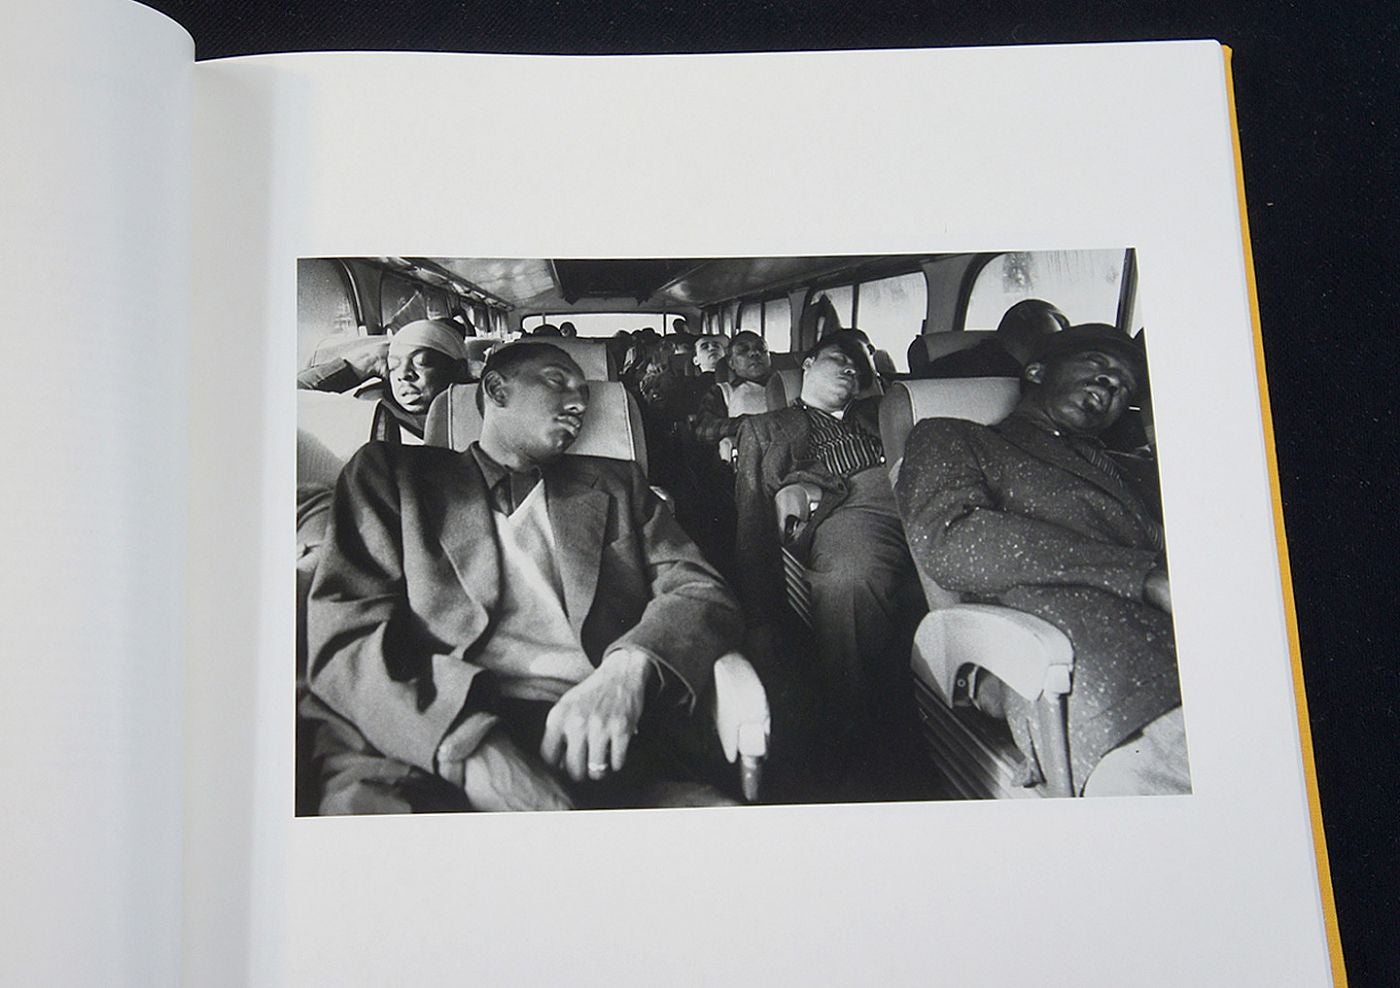 Like a One-Eyed Cat: Photographs by Lee Friedlander 1956-1987 (Special Limited Edition with 10 Photogravure Prints)